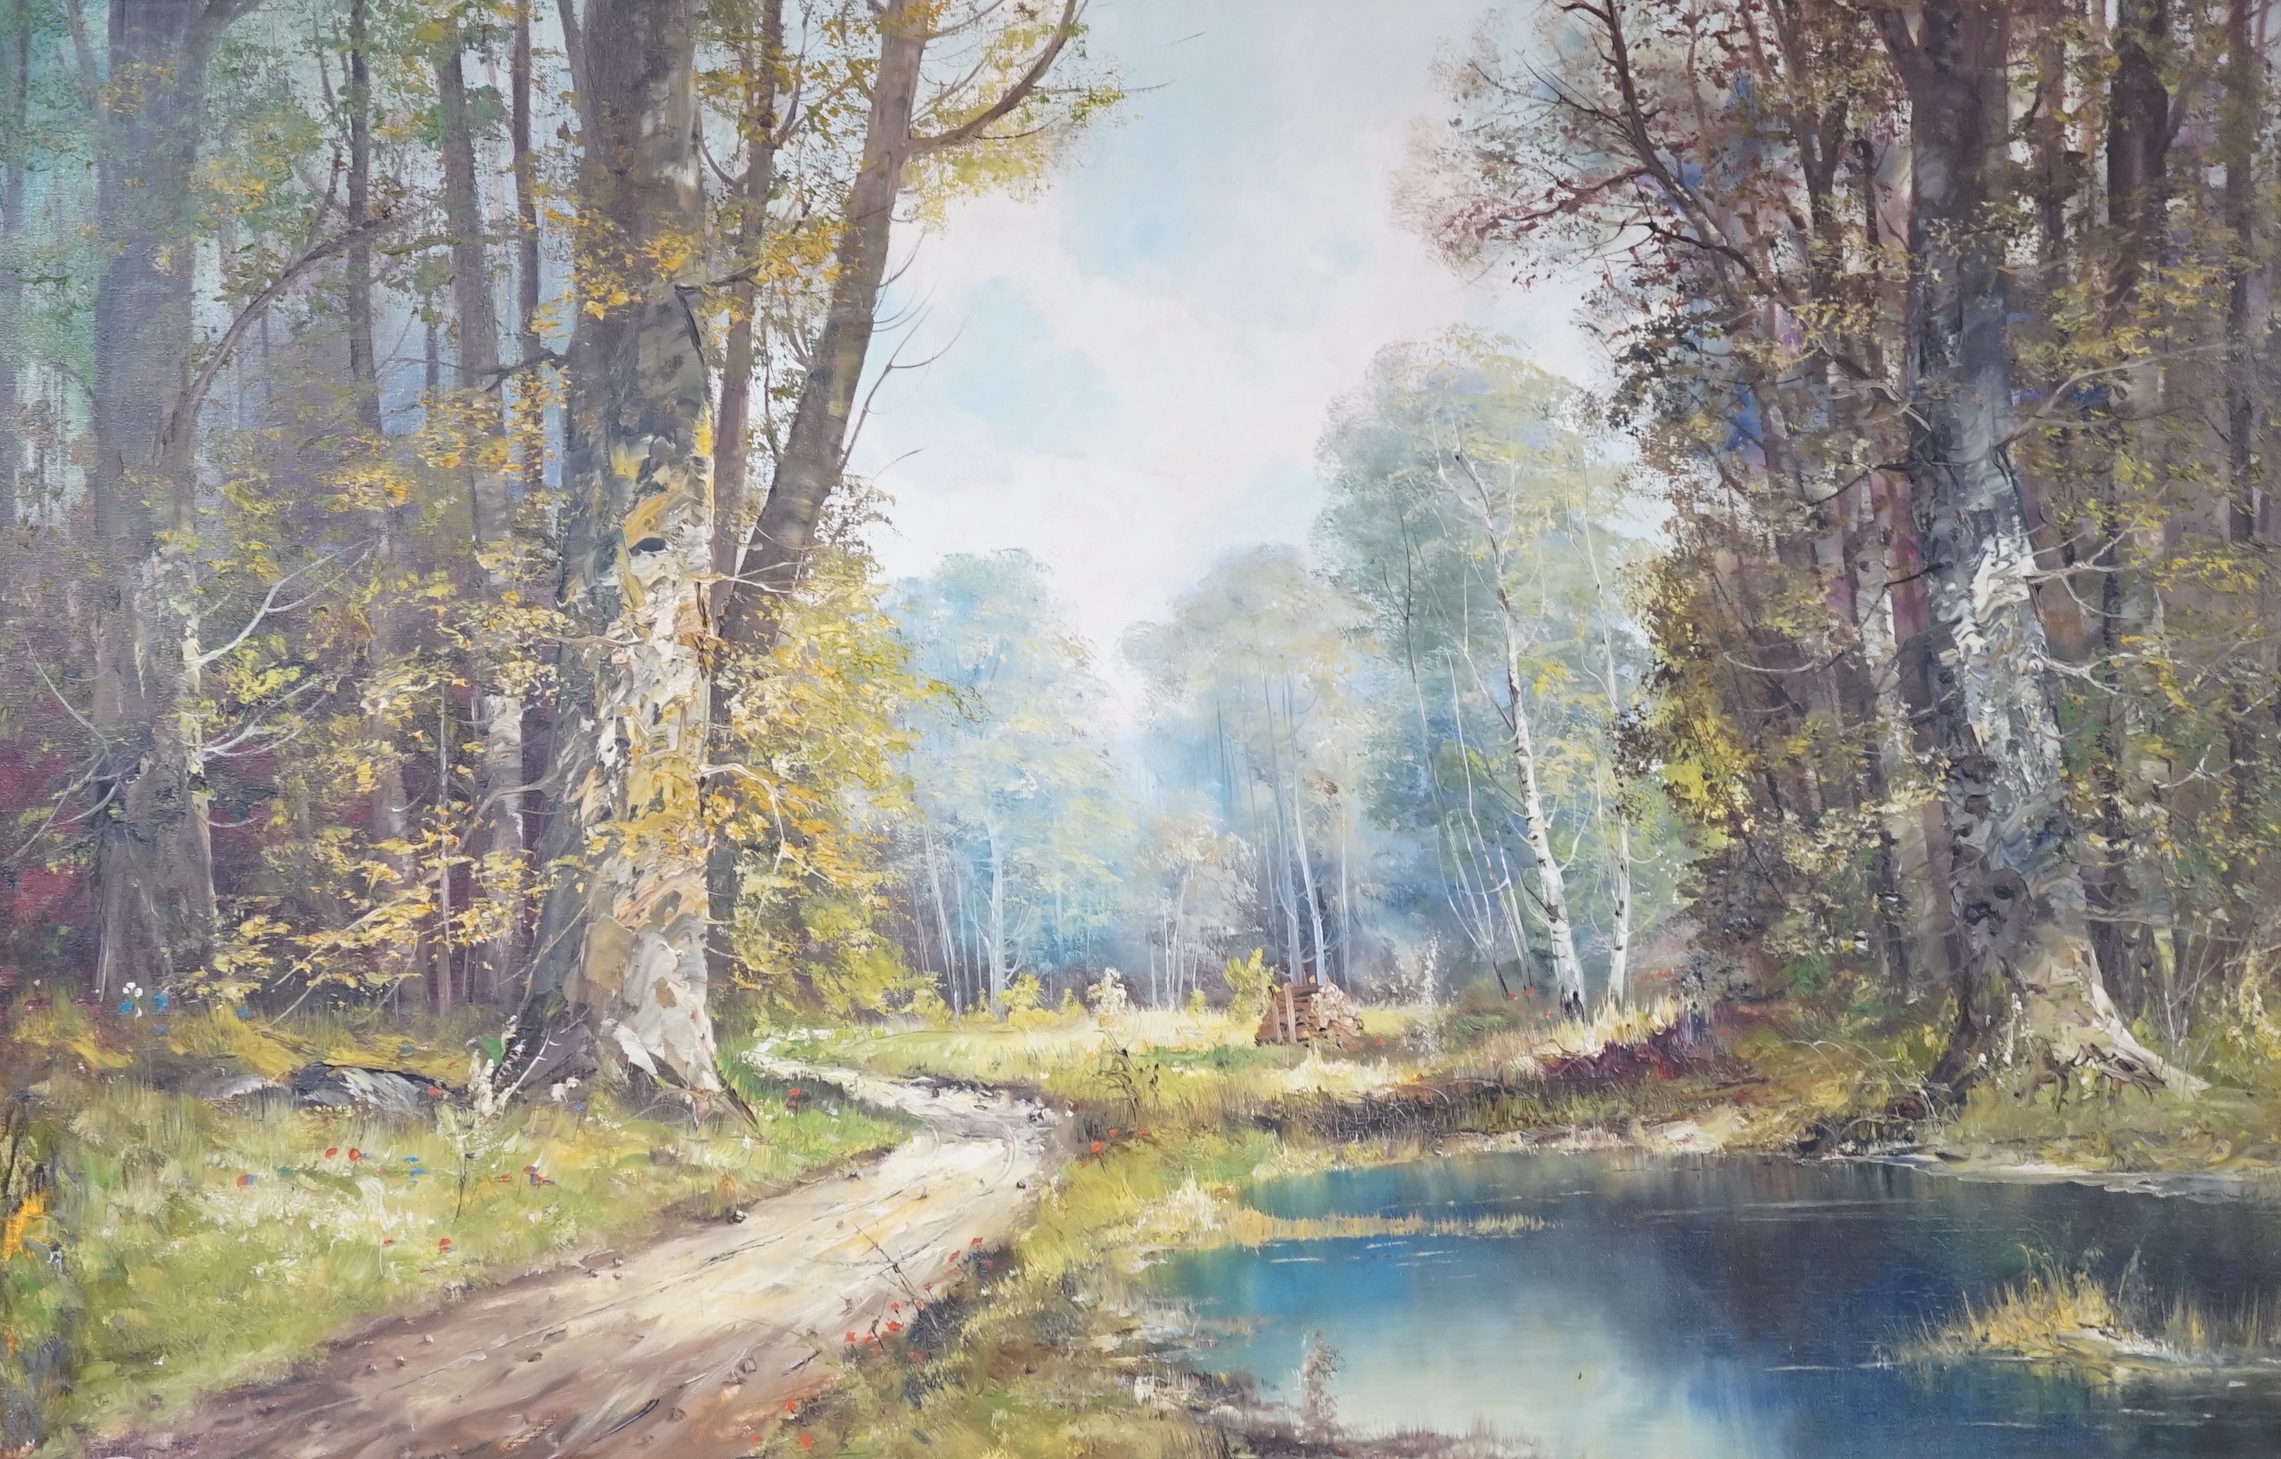 Joseph Fruhmesser (German 1929-1995), oil on canvas, Woodland path and steam, signed, 60 x 90cm